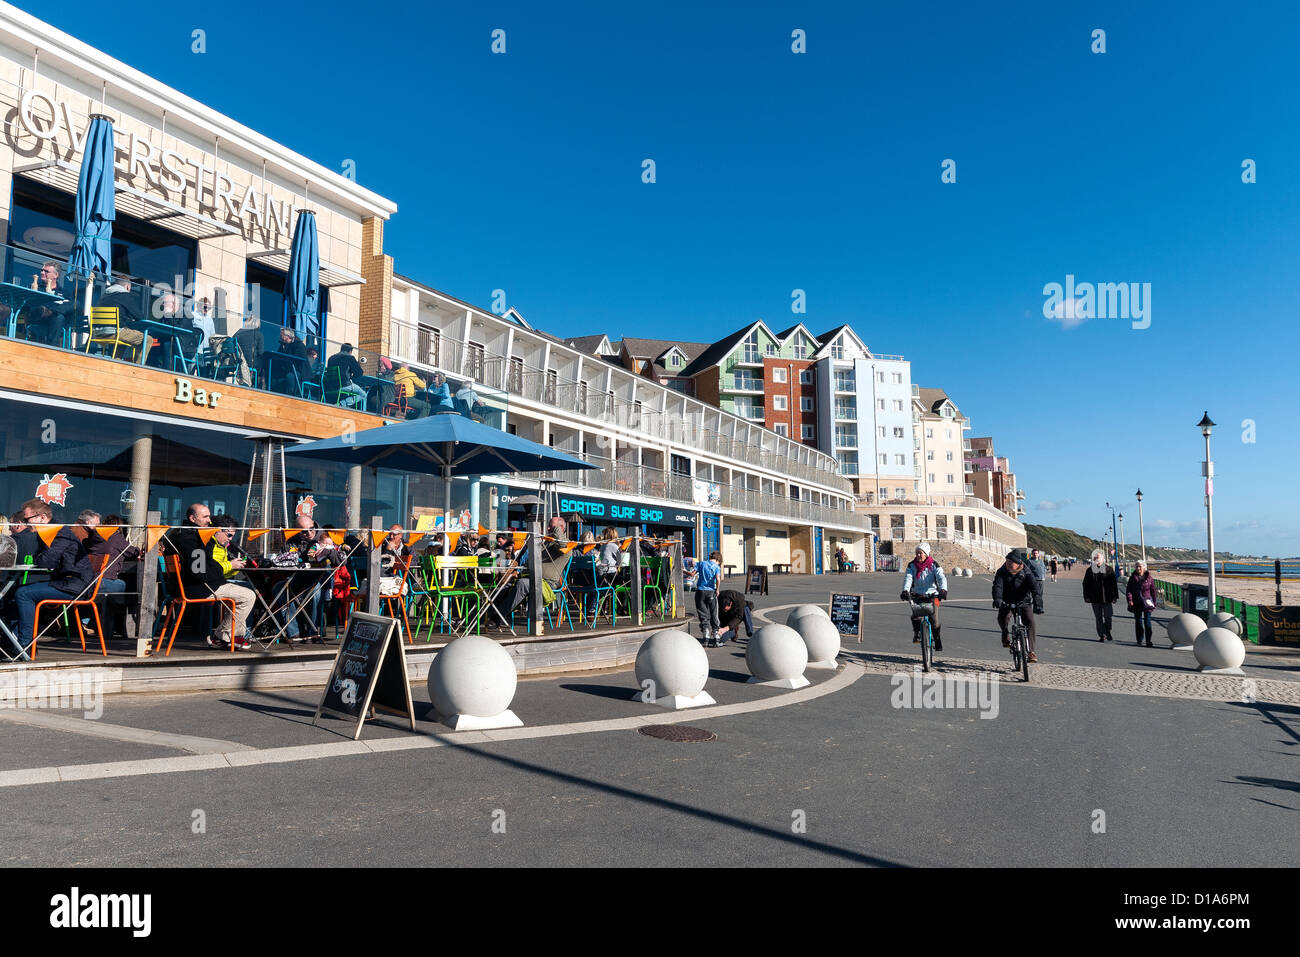 Boscombe beach promenade showing the Urban Reef Restaurant the Sorted Surf Shop and the new flat development by Barrett Homes Stock Photo